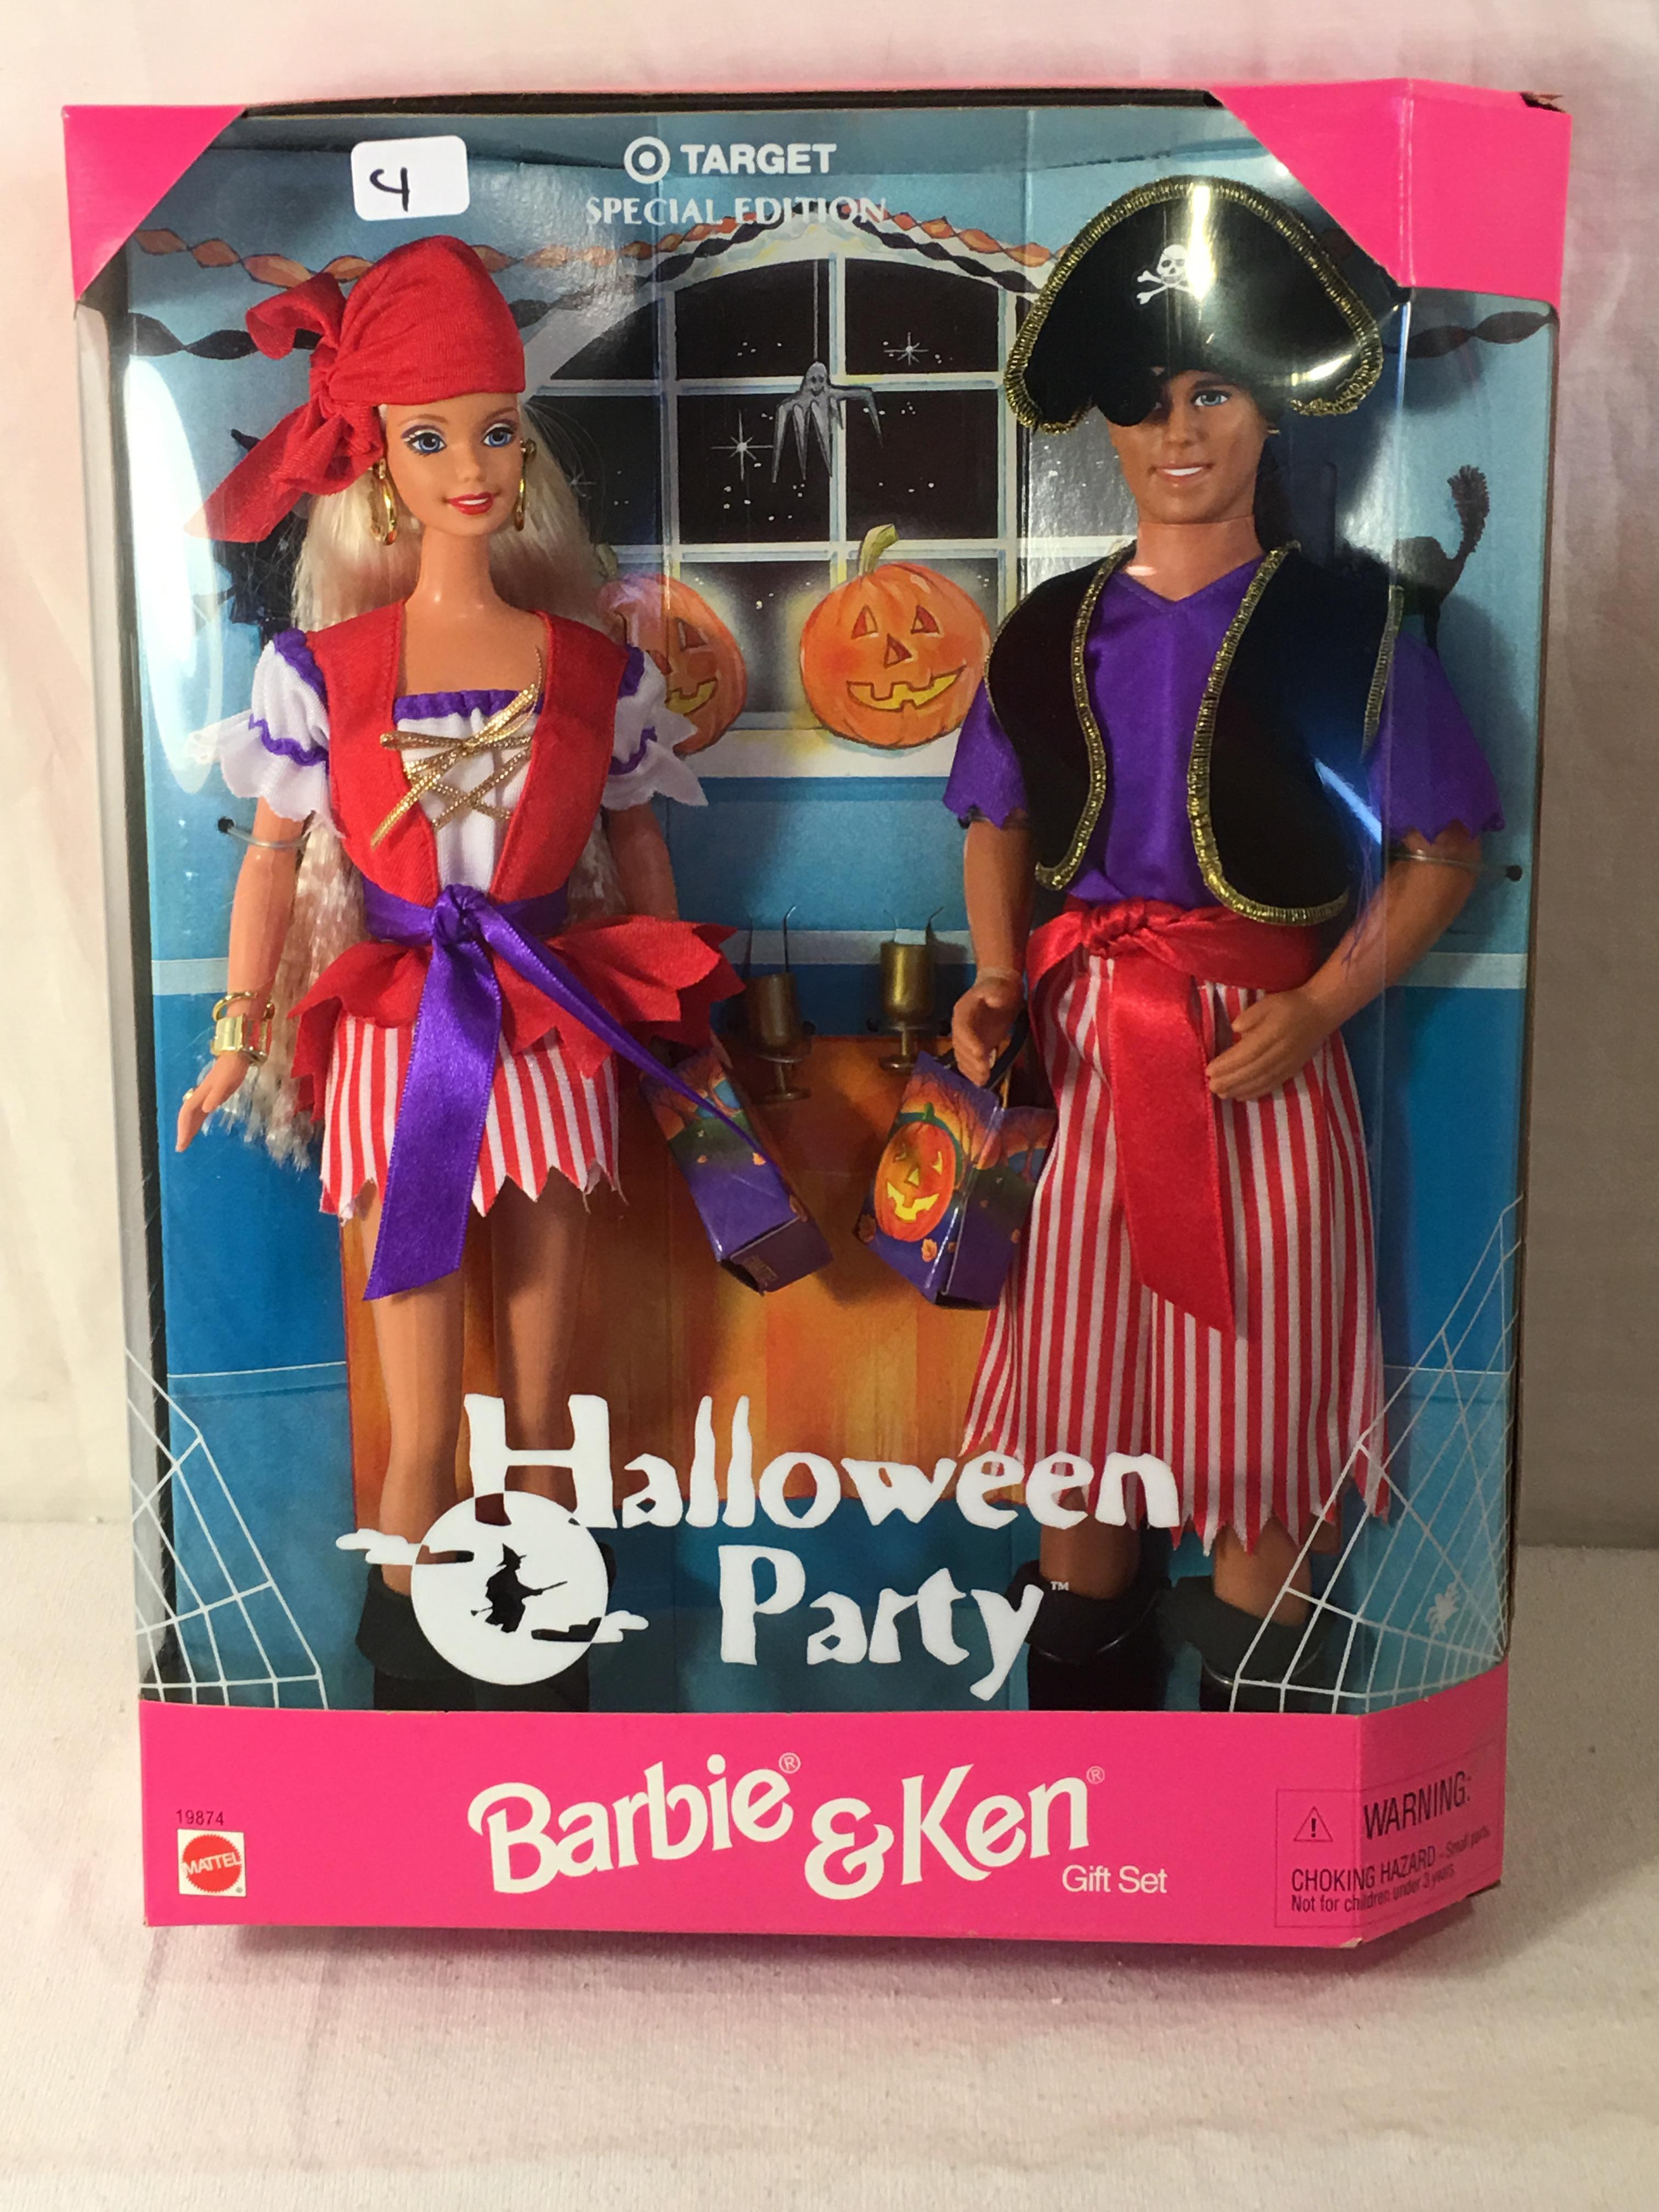 NIB Collector Target Special Edition Halloween Party Barbie & Ken Doll Box: 13"x10"